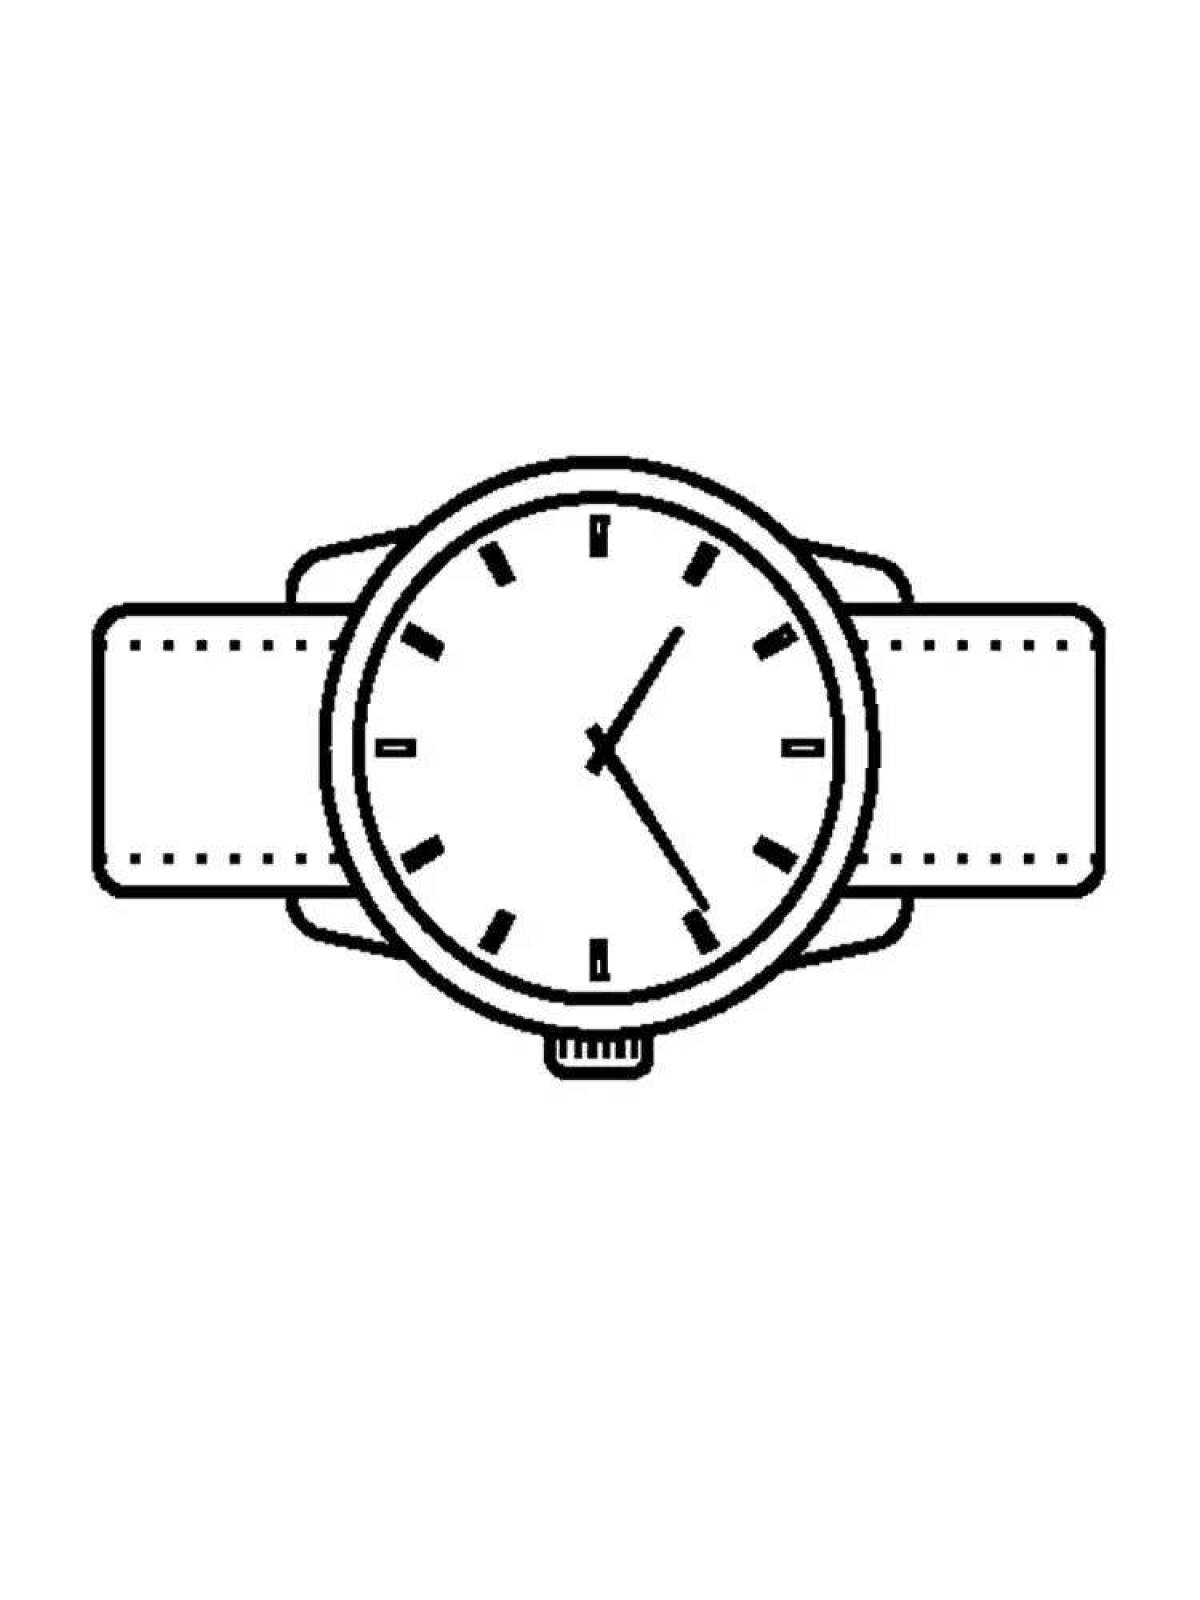 Coloring page charming wrist watch